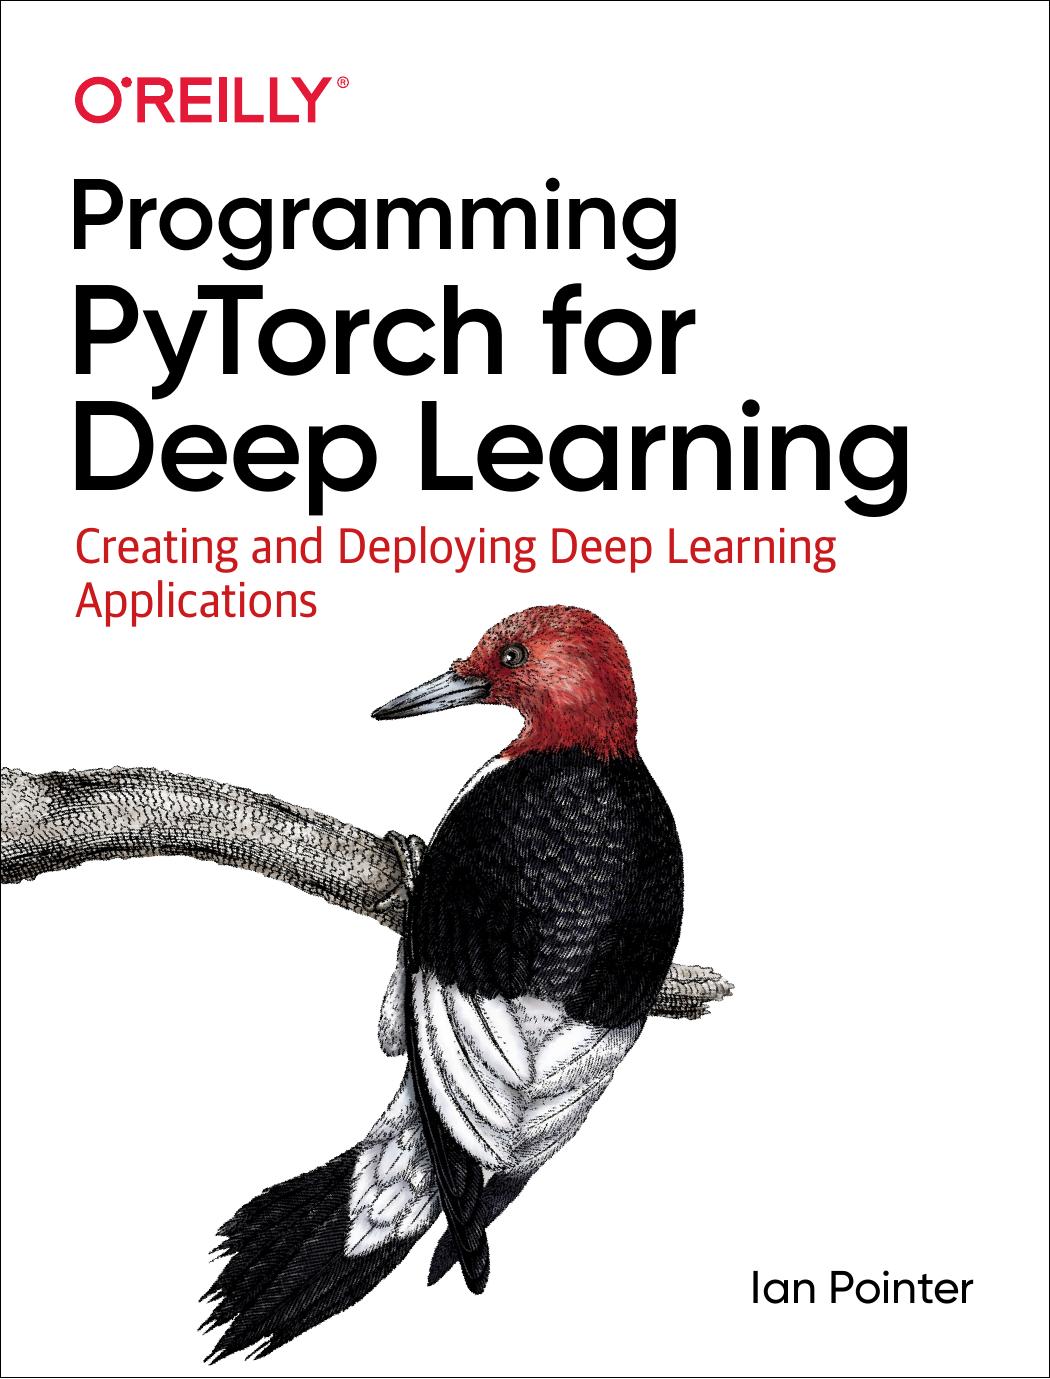 Programming PyTorch for Deep Learning Creating and Deploying Deep Learning Applications (Ian Pointer)1492045357